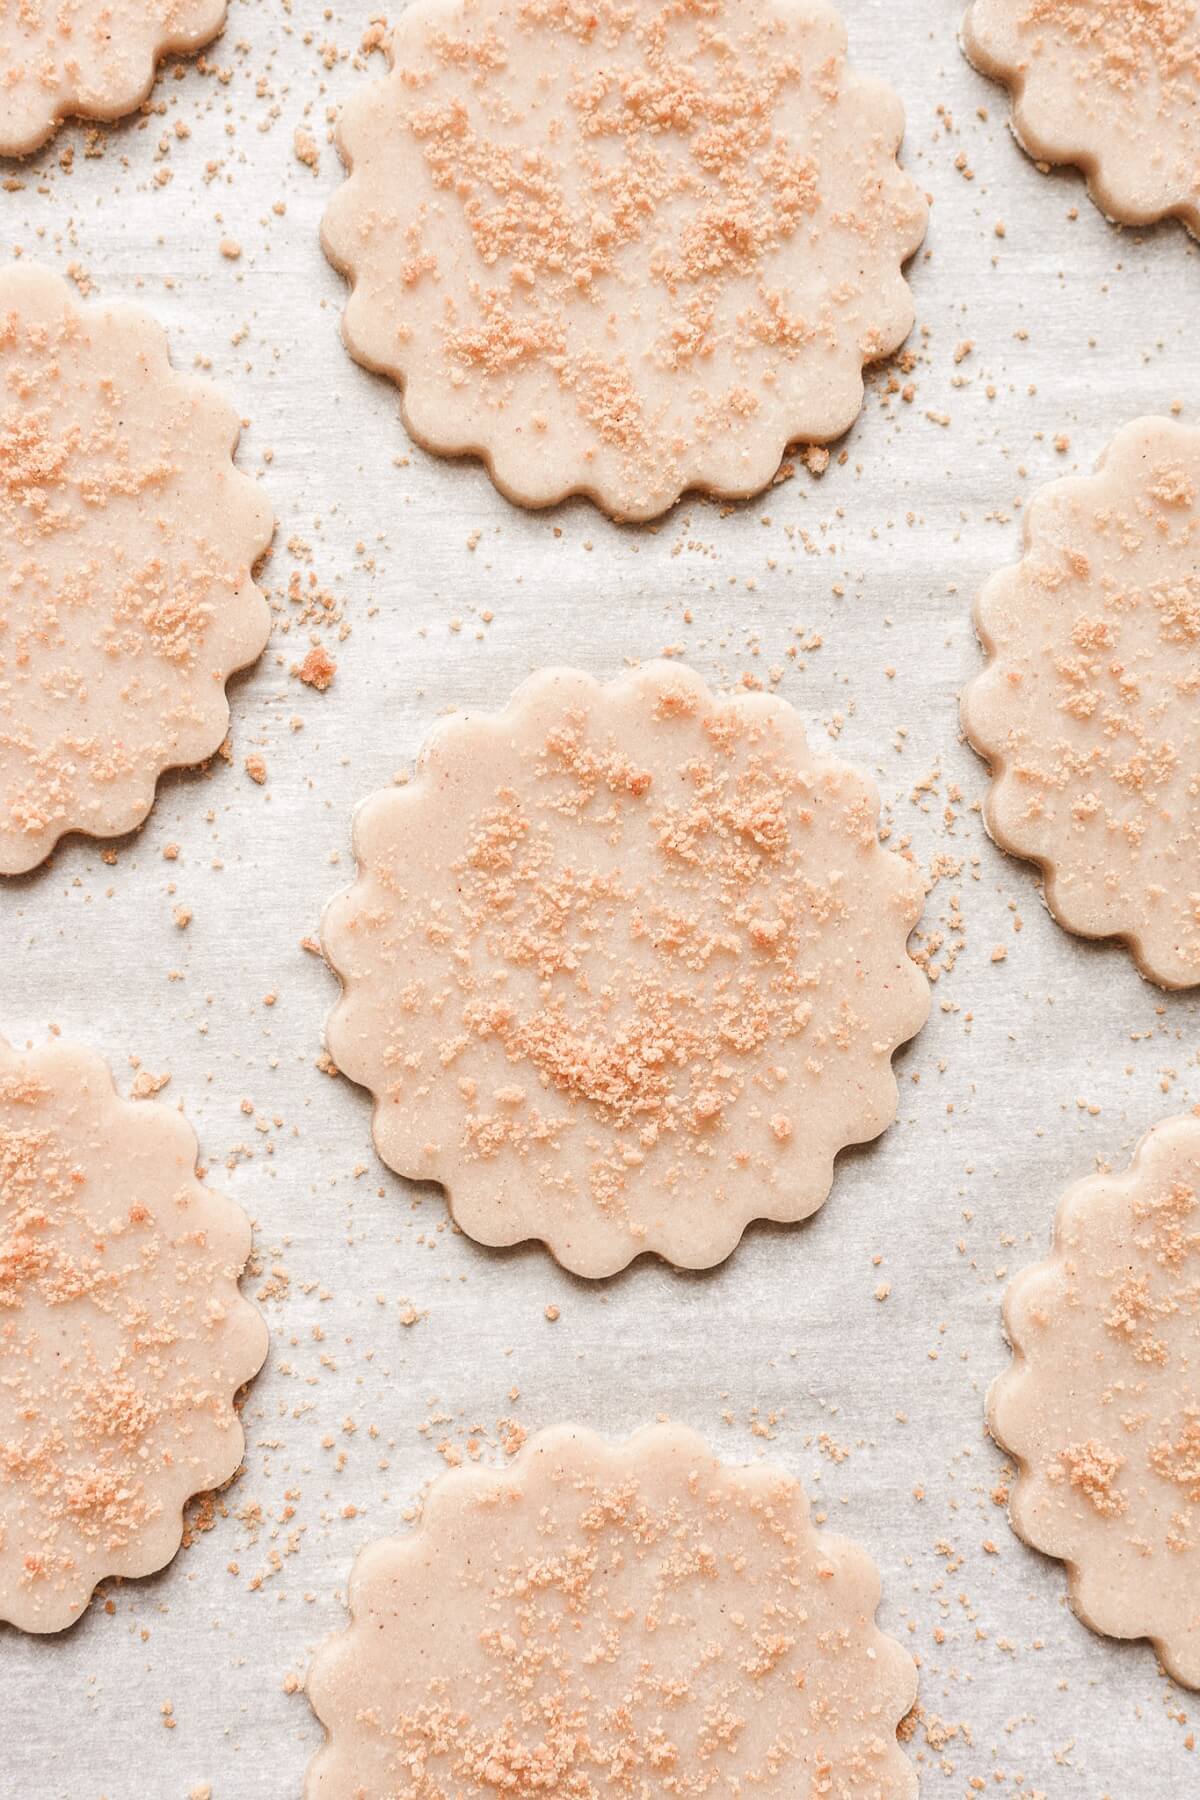 Cutout whole wheat shortbread cookies sprinkled with graham cracker crumbs.